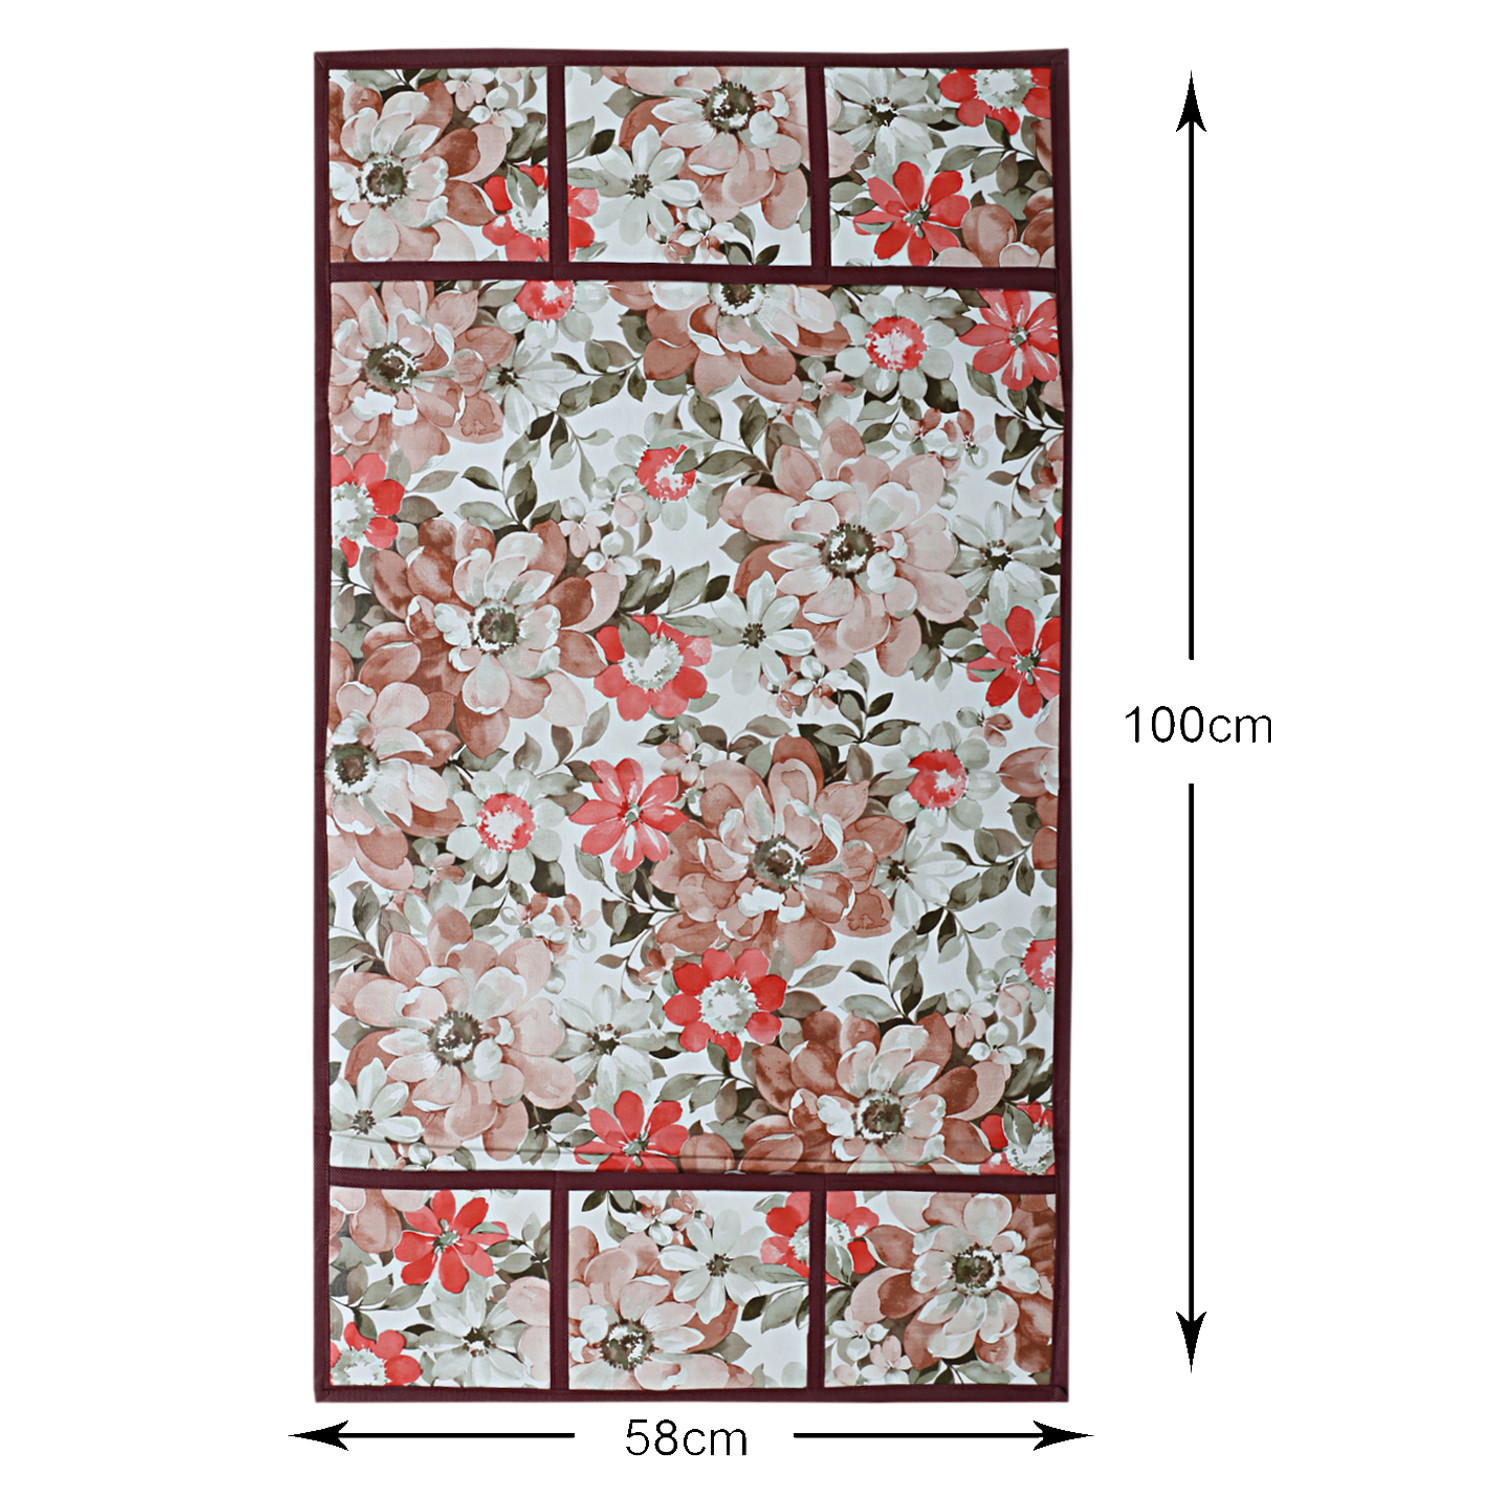 Kuber Industries Flower Printed PVC Fridge Top Cover, Protect For Scratches, Wear & Tear And Dust With 6 Utility Side Pockets (Pink)